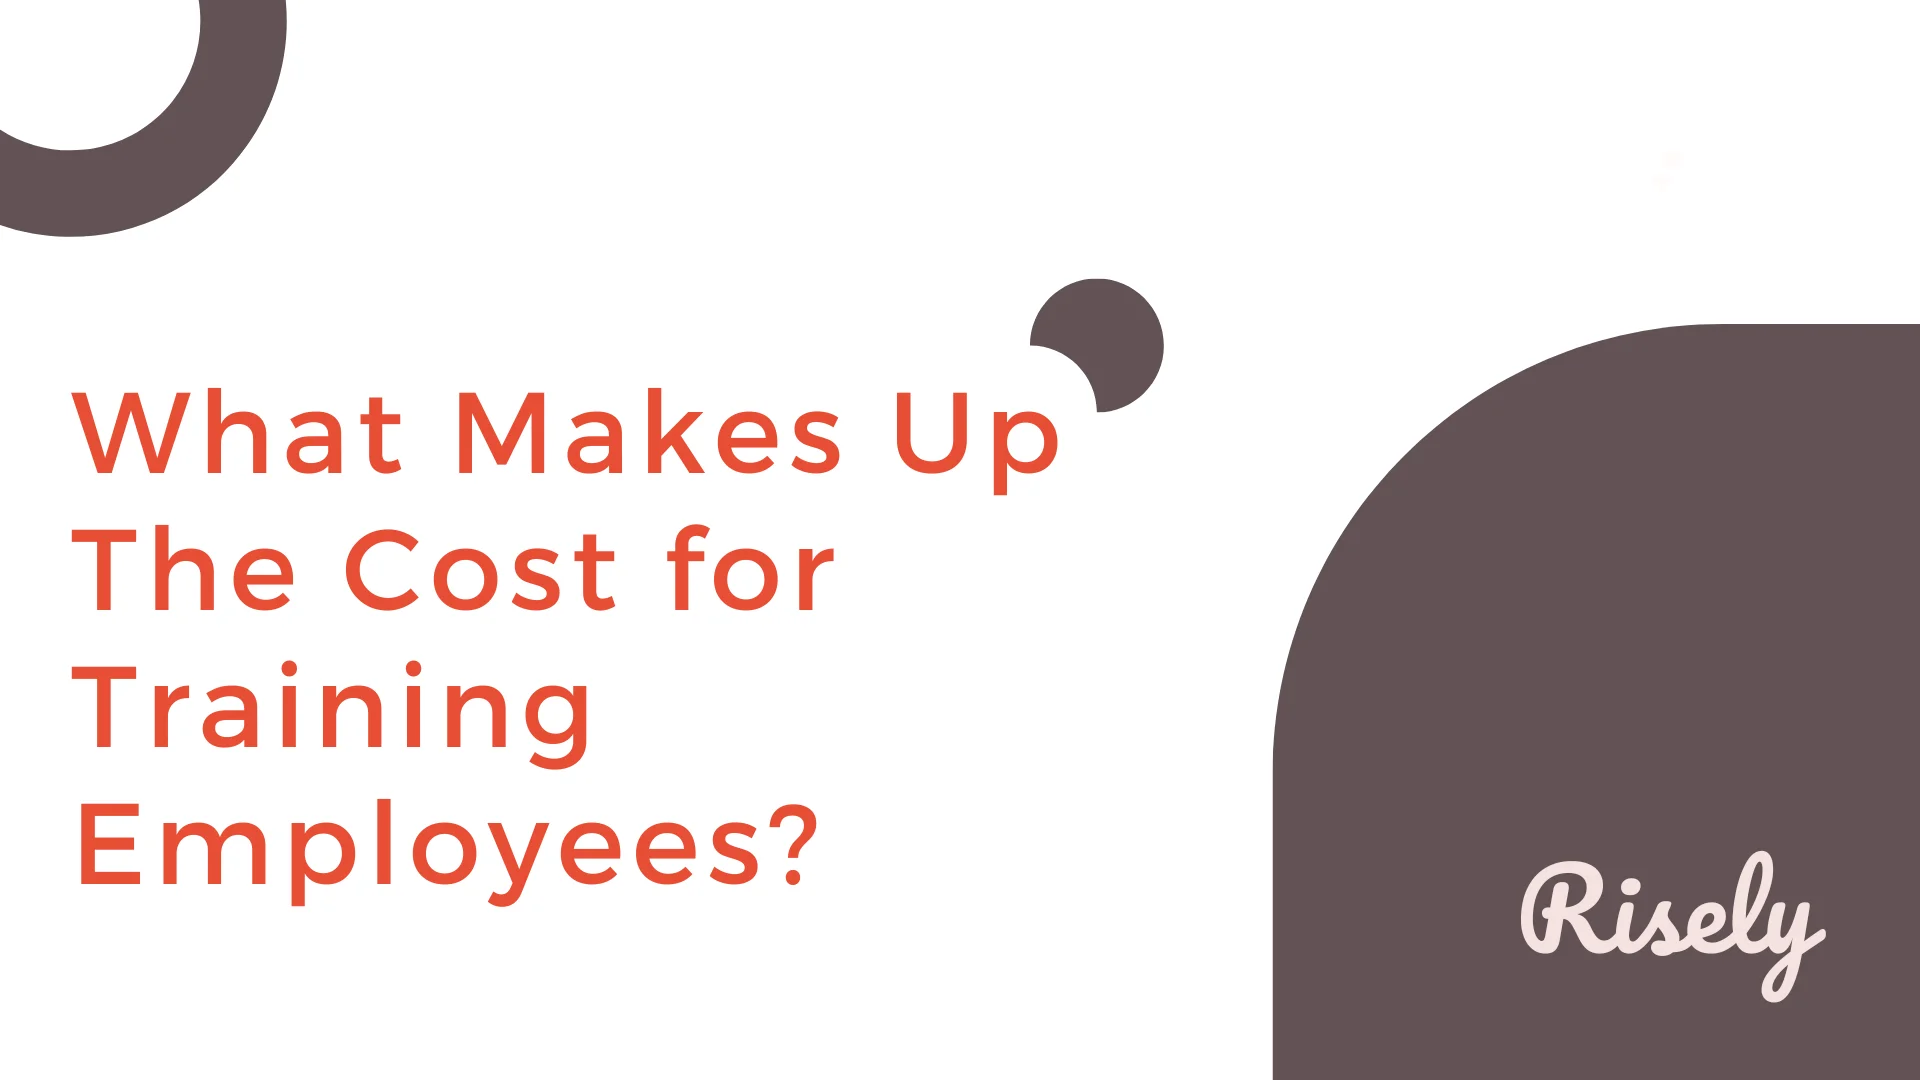 What Makes Up The Cost for Training Employees?